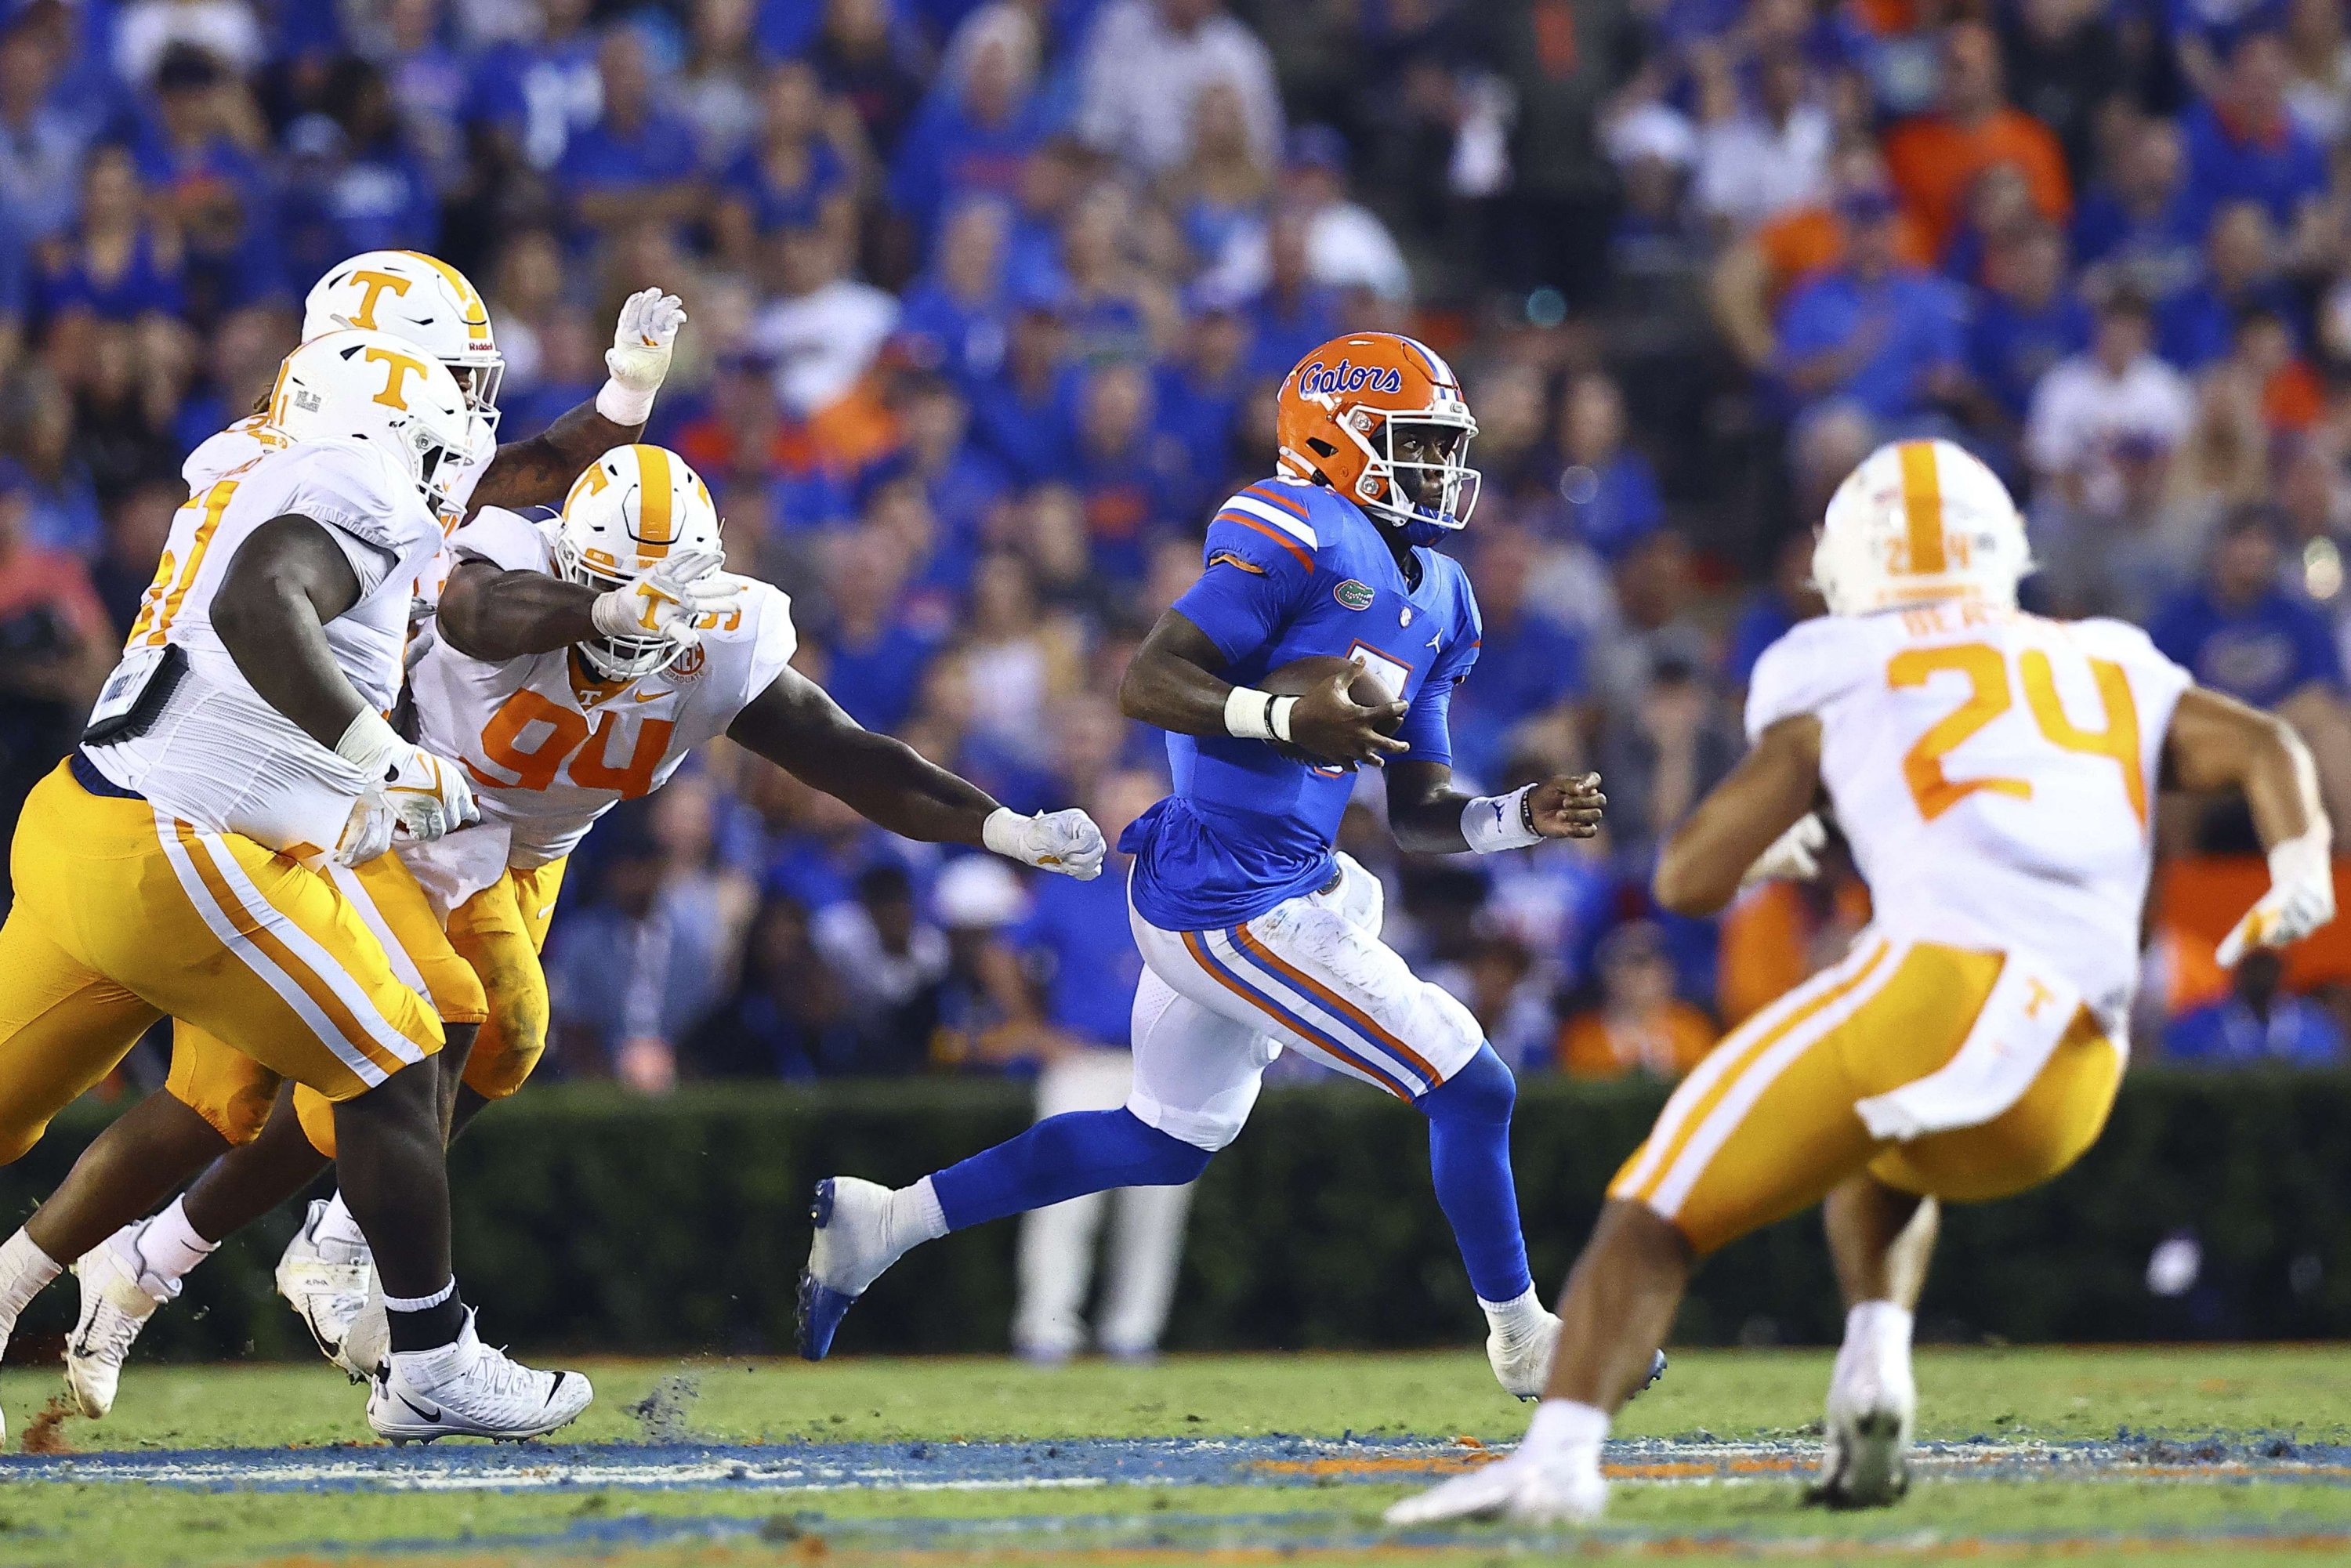 Emory Jones (5) of the Florida Gators runs for yardage during the first quarter of a game against the Tennessee Volunteers at Ben Hill Griffin Stadium, Gainesville, Florida, U.S., Sept. 25, 2021. (AFP Photo)